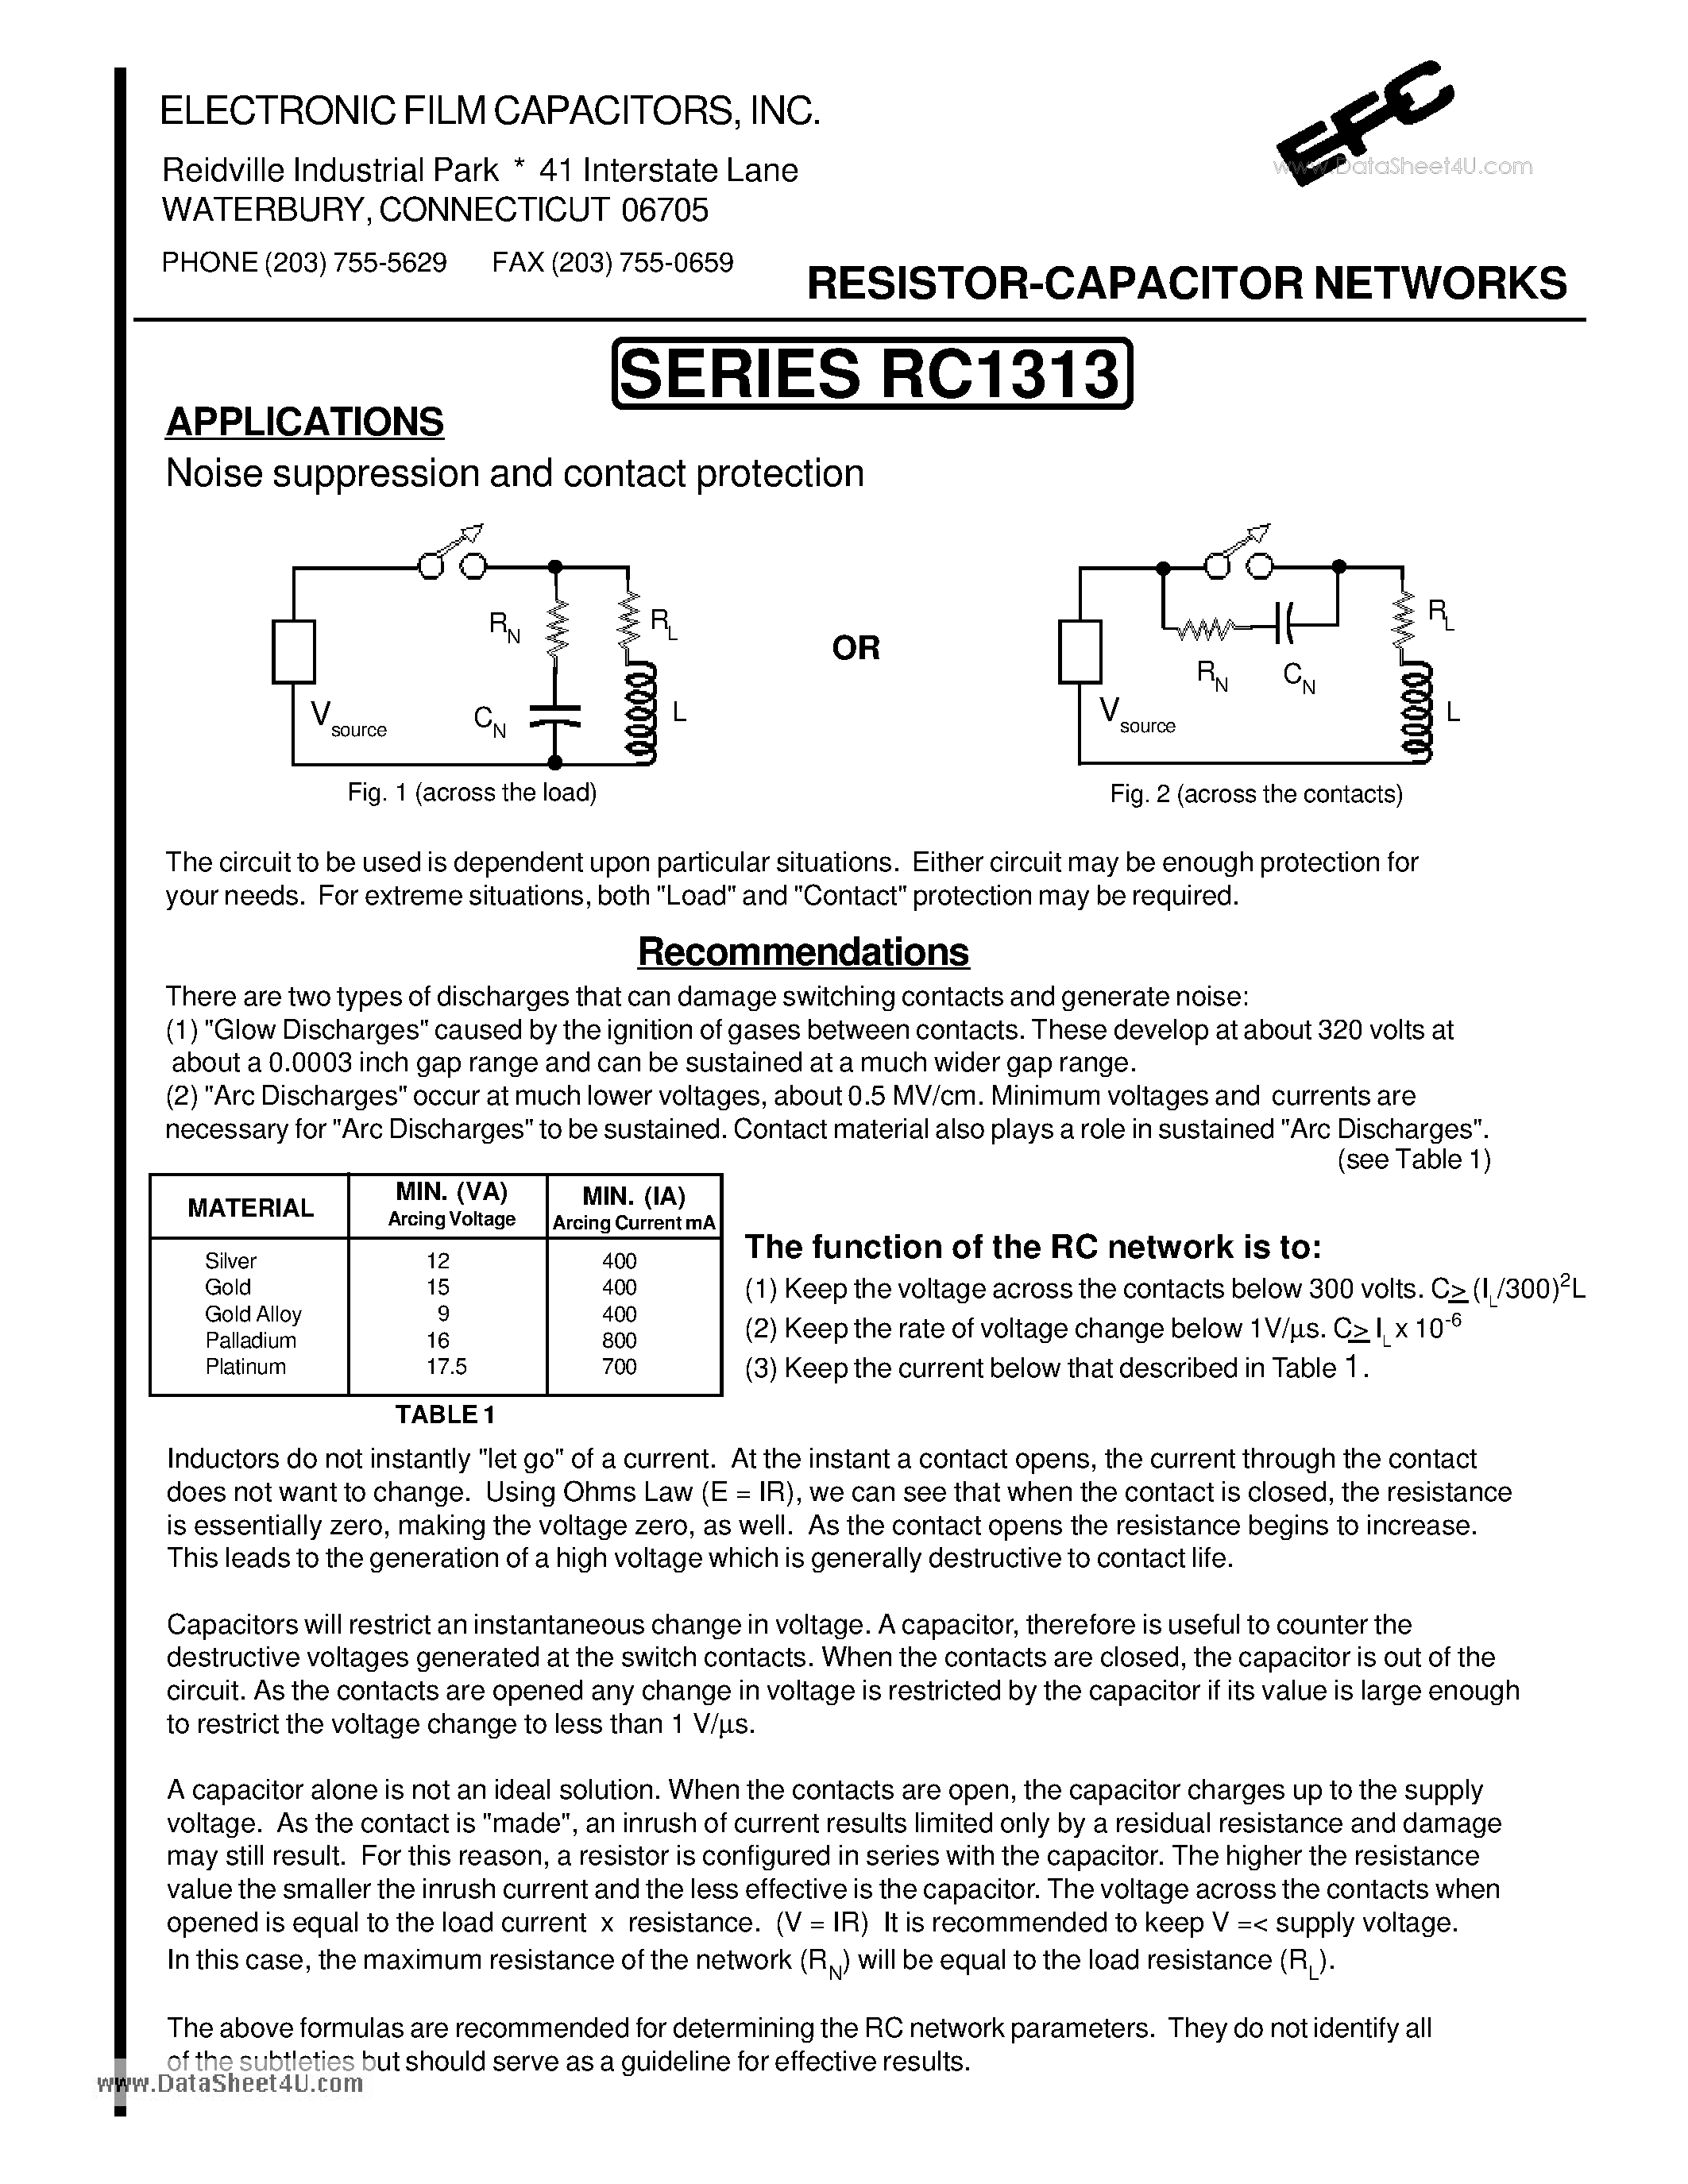 Datasheet RC1313 - RESISTOR-CAPACITOR NETWORKS page 1